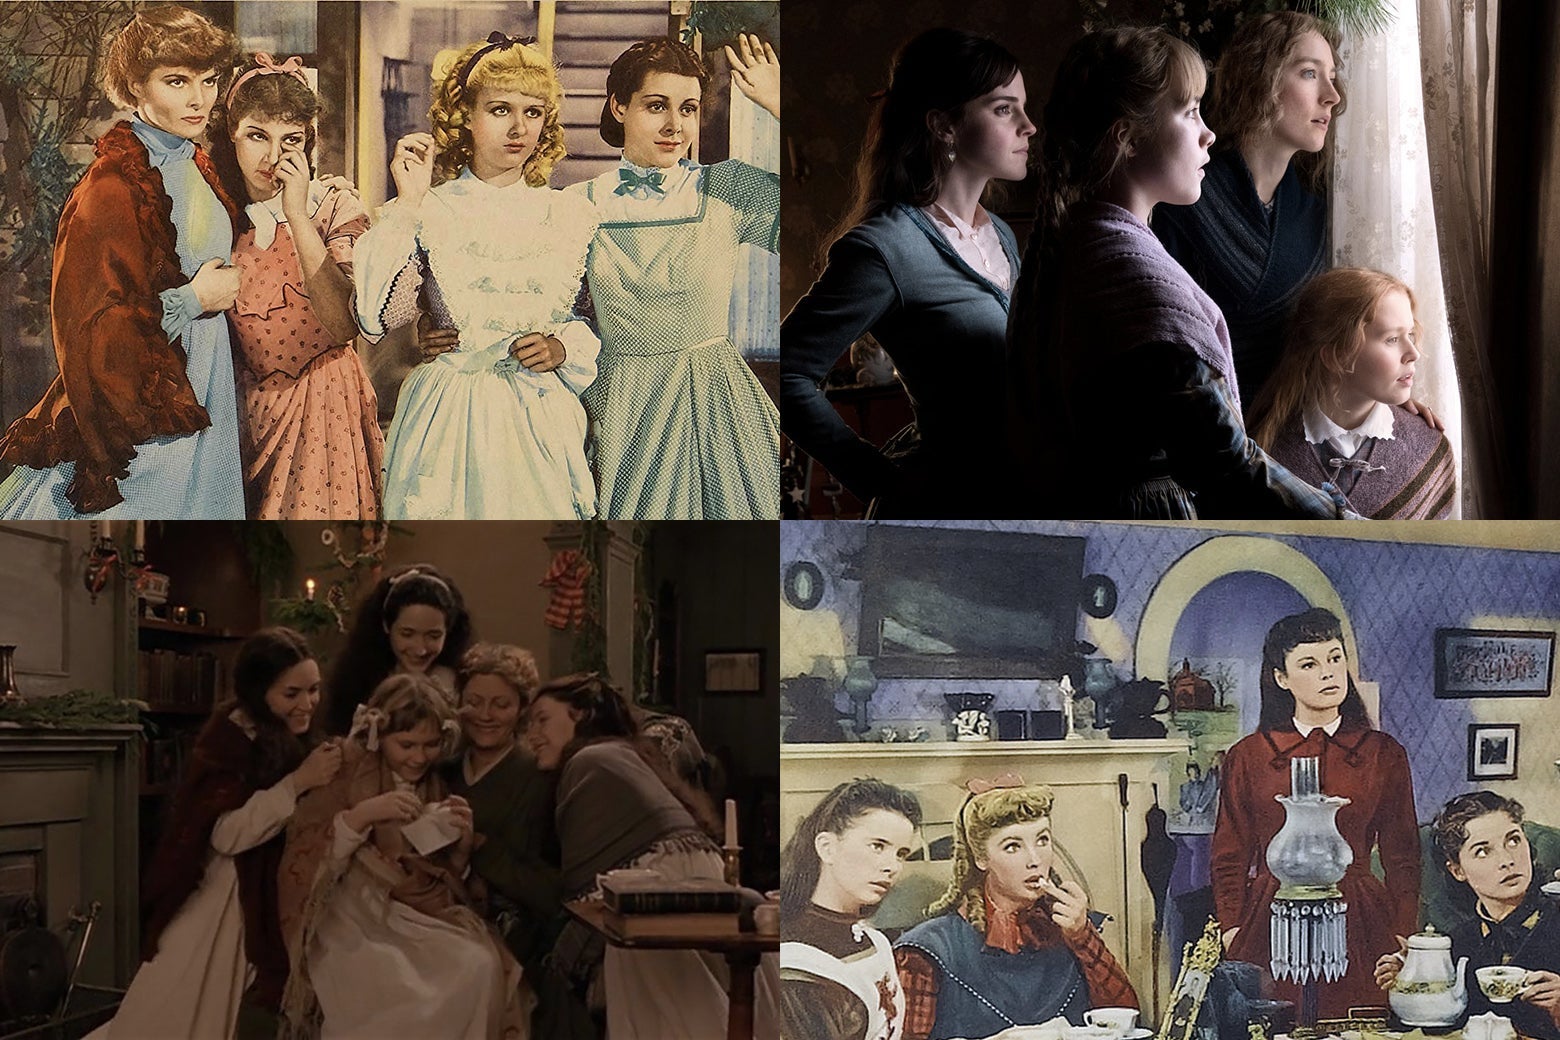 Stills from the 1933, 1949, 1994, and 2019 film versions of Little Women, showing various incarnations of the March sisters.